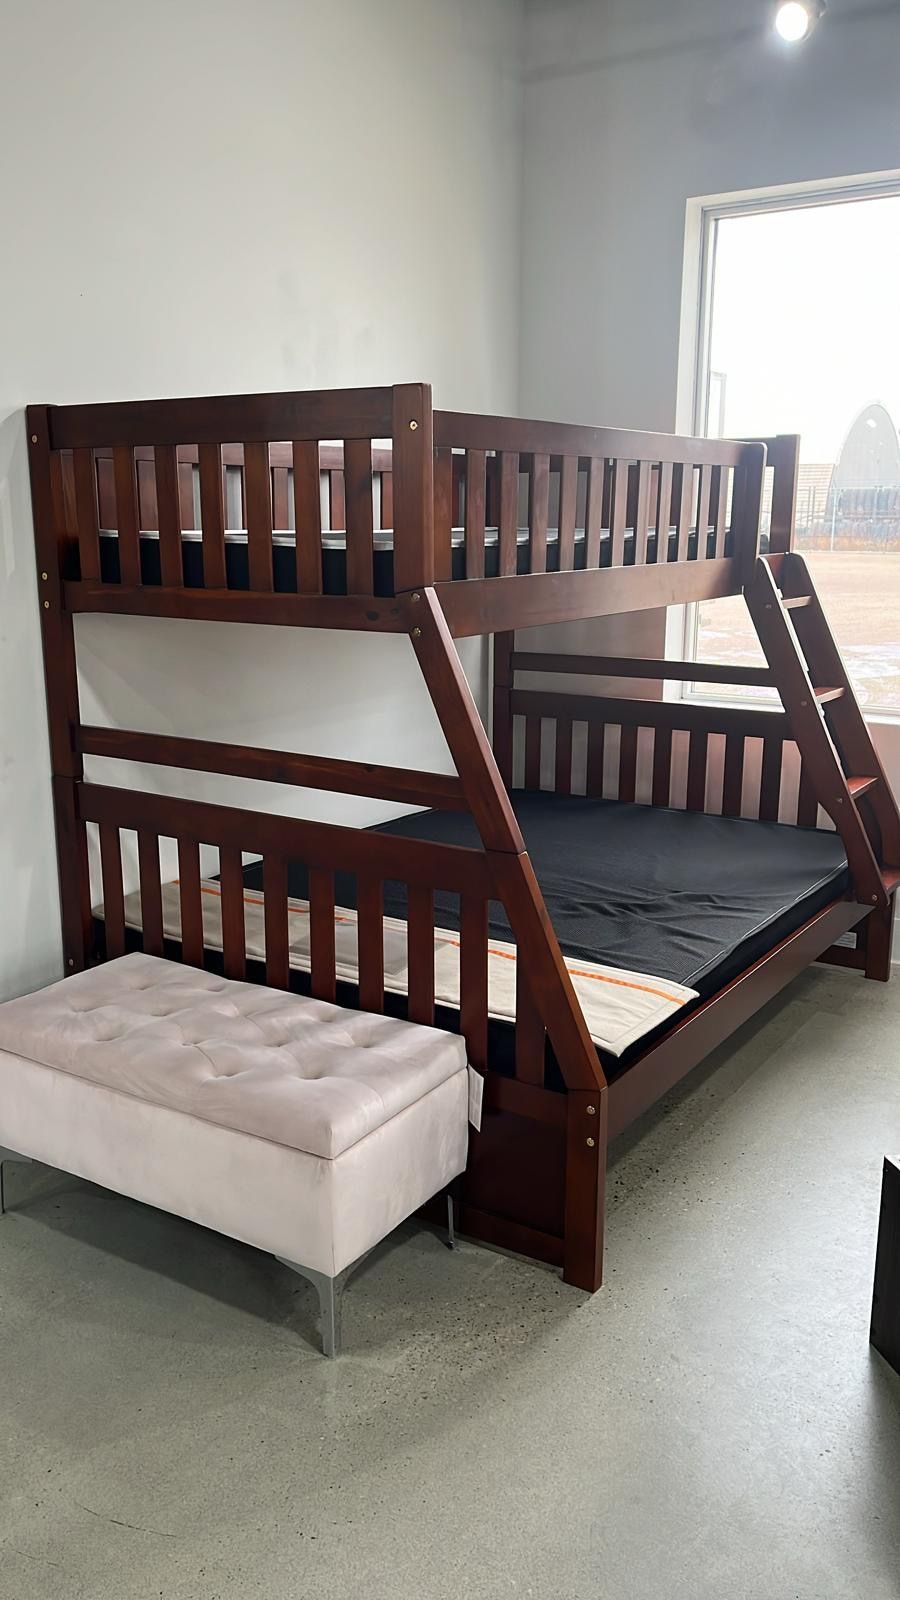 Tax Season Event!! Transitional Style, Various Finished Twin/Full Bunk Bed